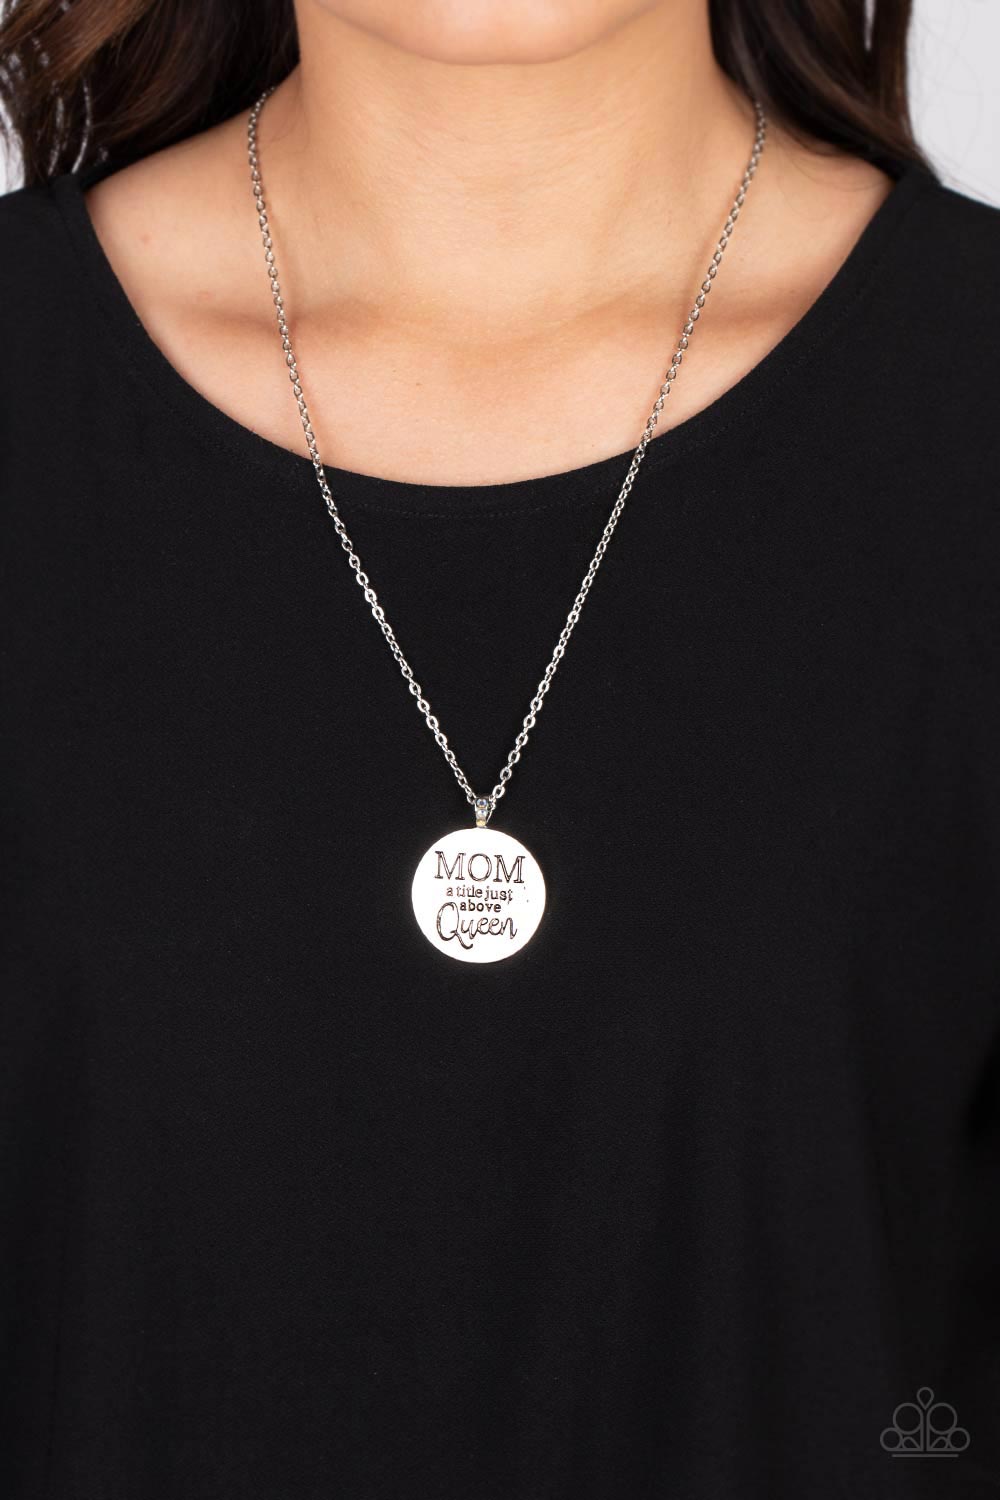 Mother Dear Multi Inspirational Necklace - Paparazzi Accessories-on model - CarasShop.com - $5 Jewelry by Cara Jewels